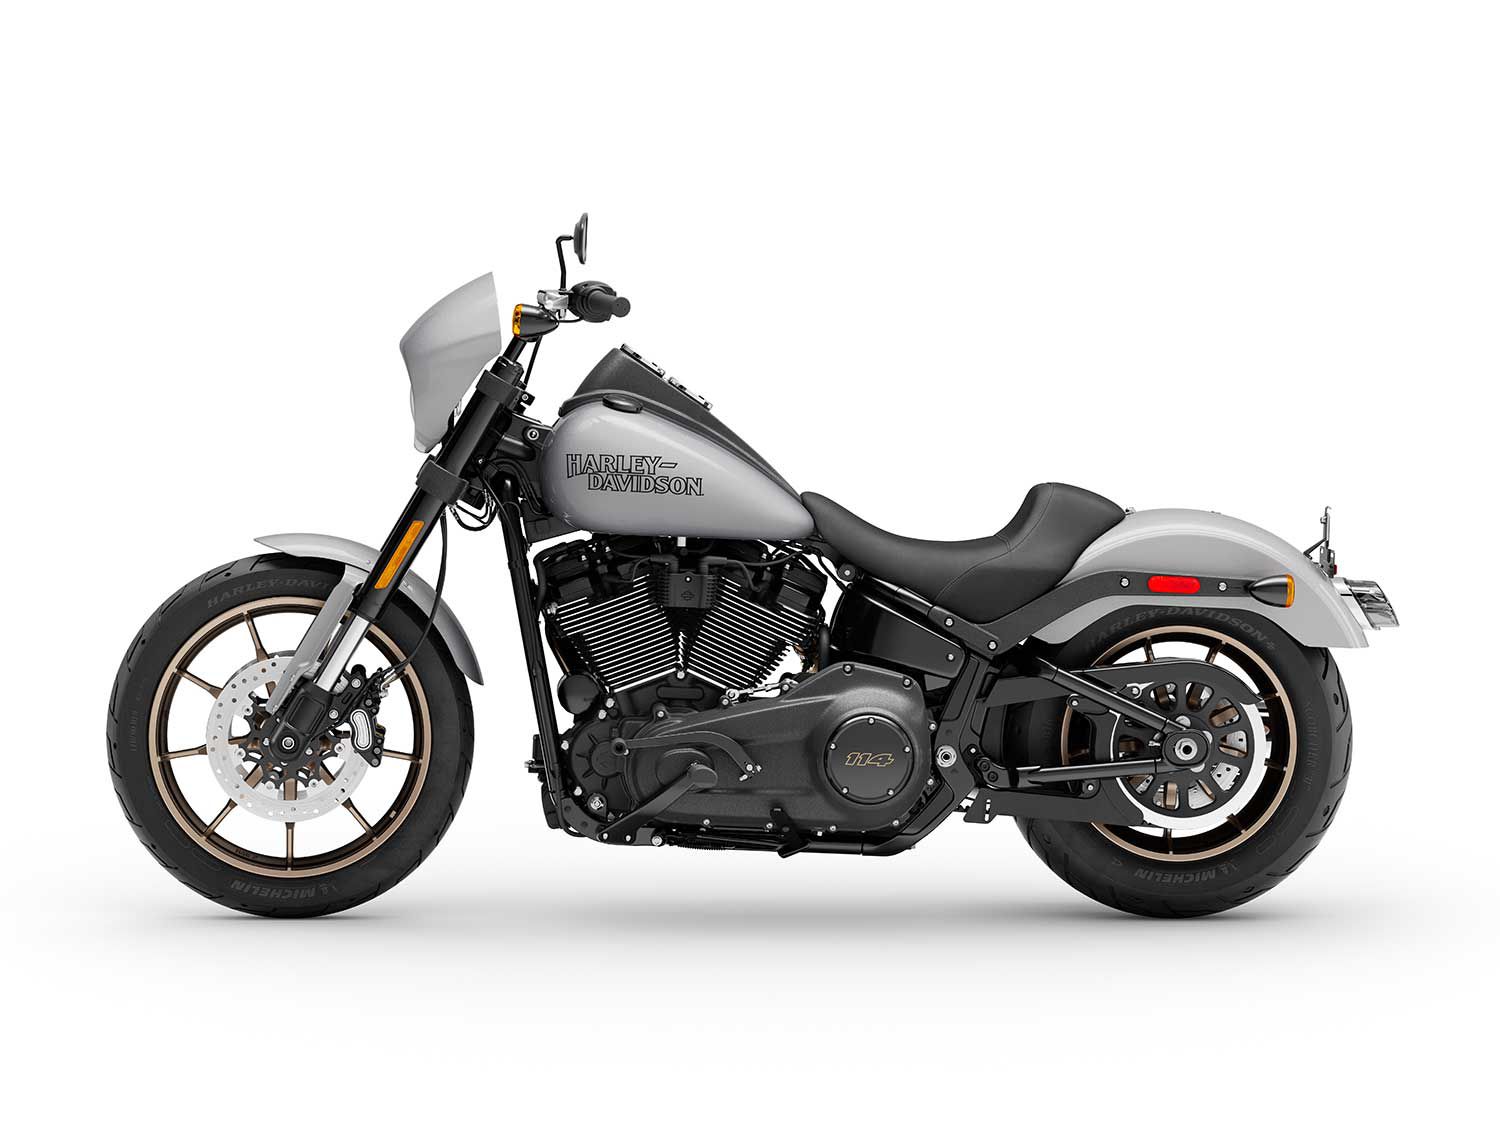 The Harley Davidson Low Rider S Is Back Motorcycle Cruiser